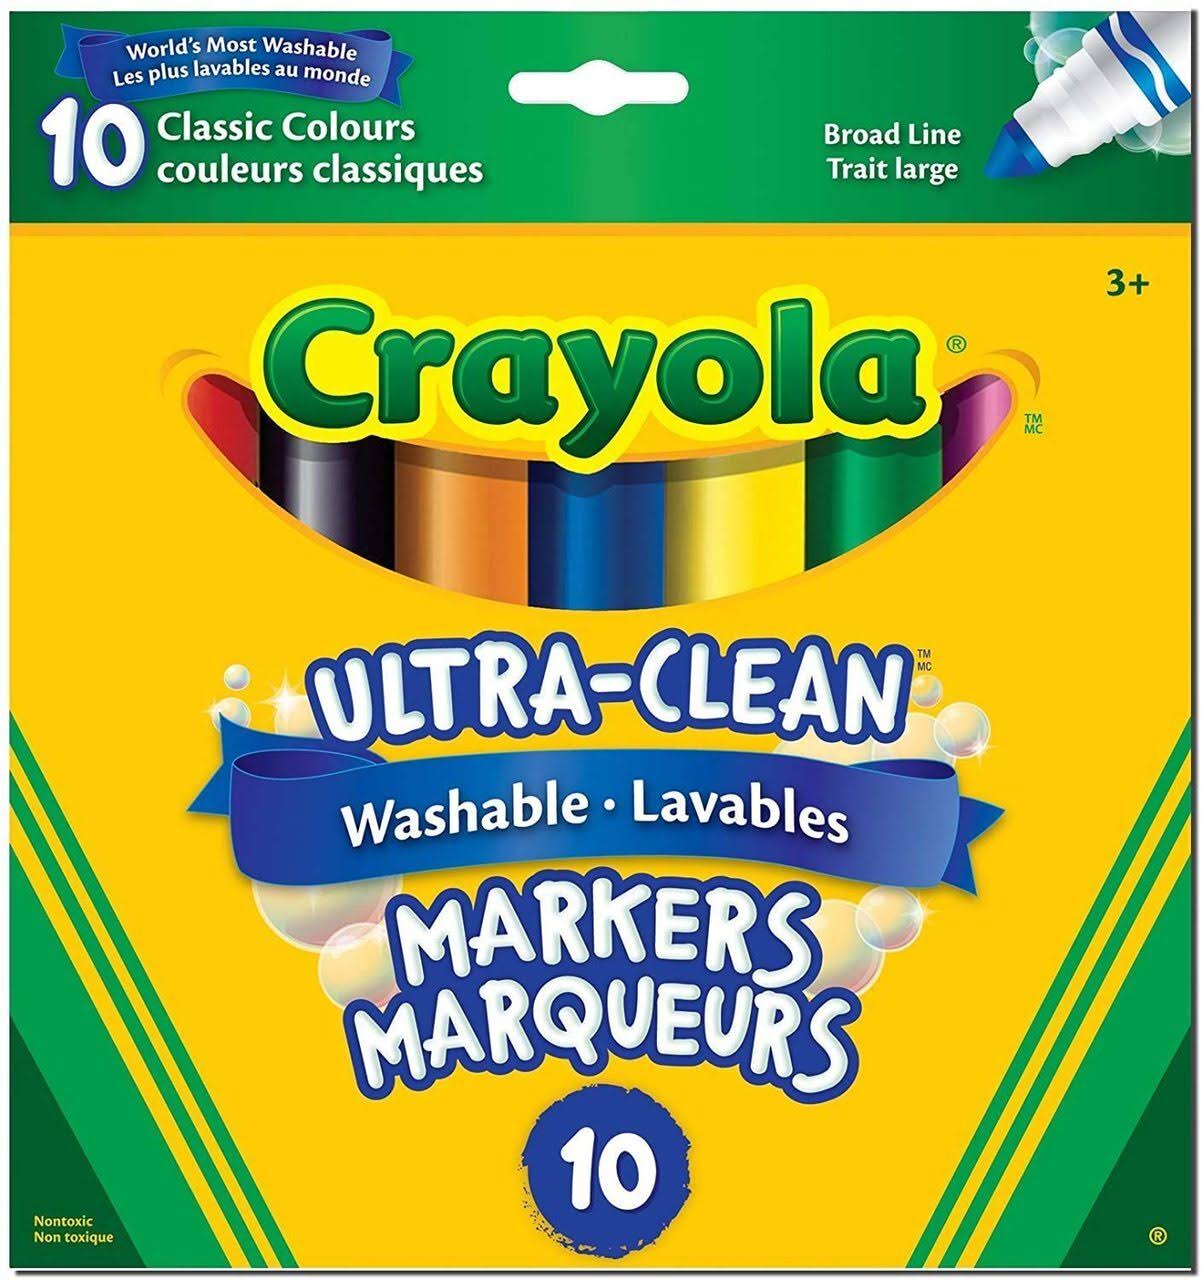 Crayola Ultra-clean Washable Broad Line Markers - Classic Colours, 10ct